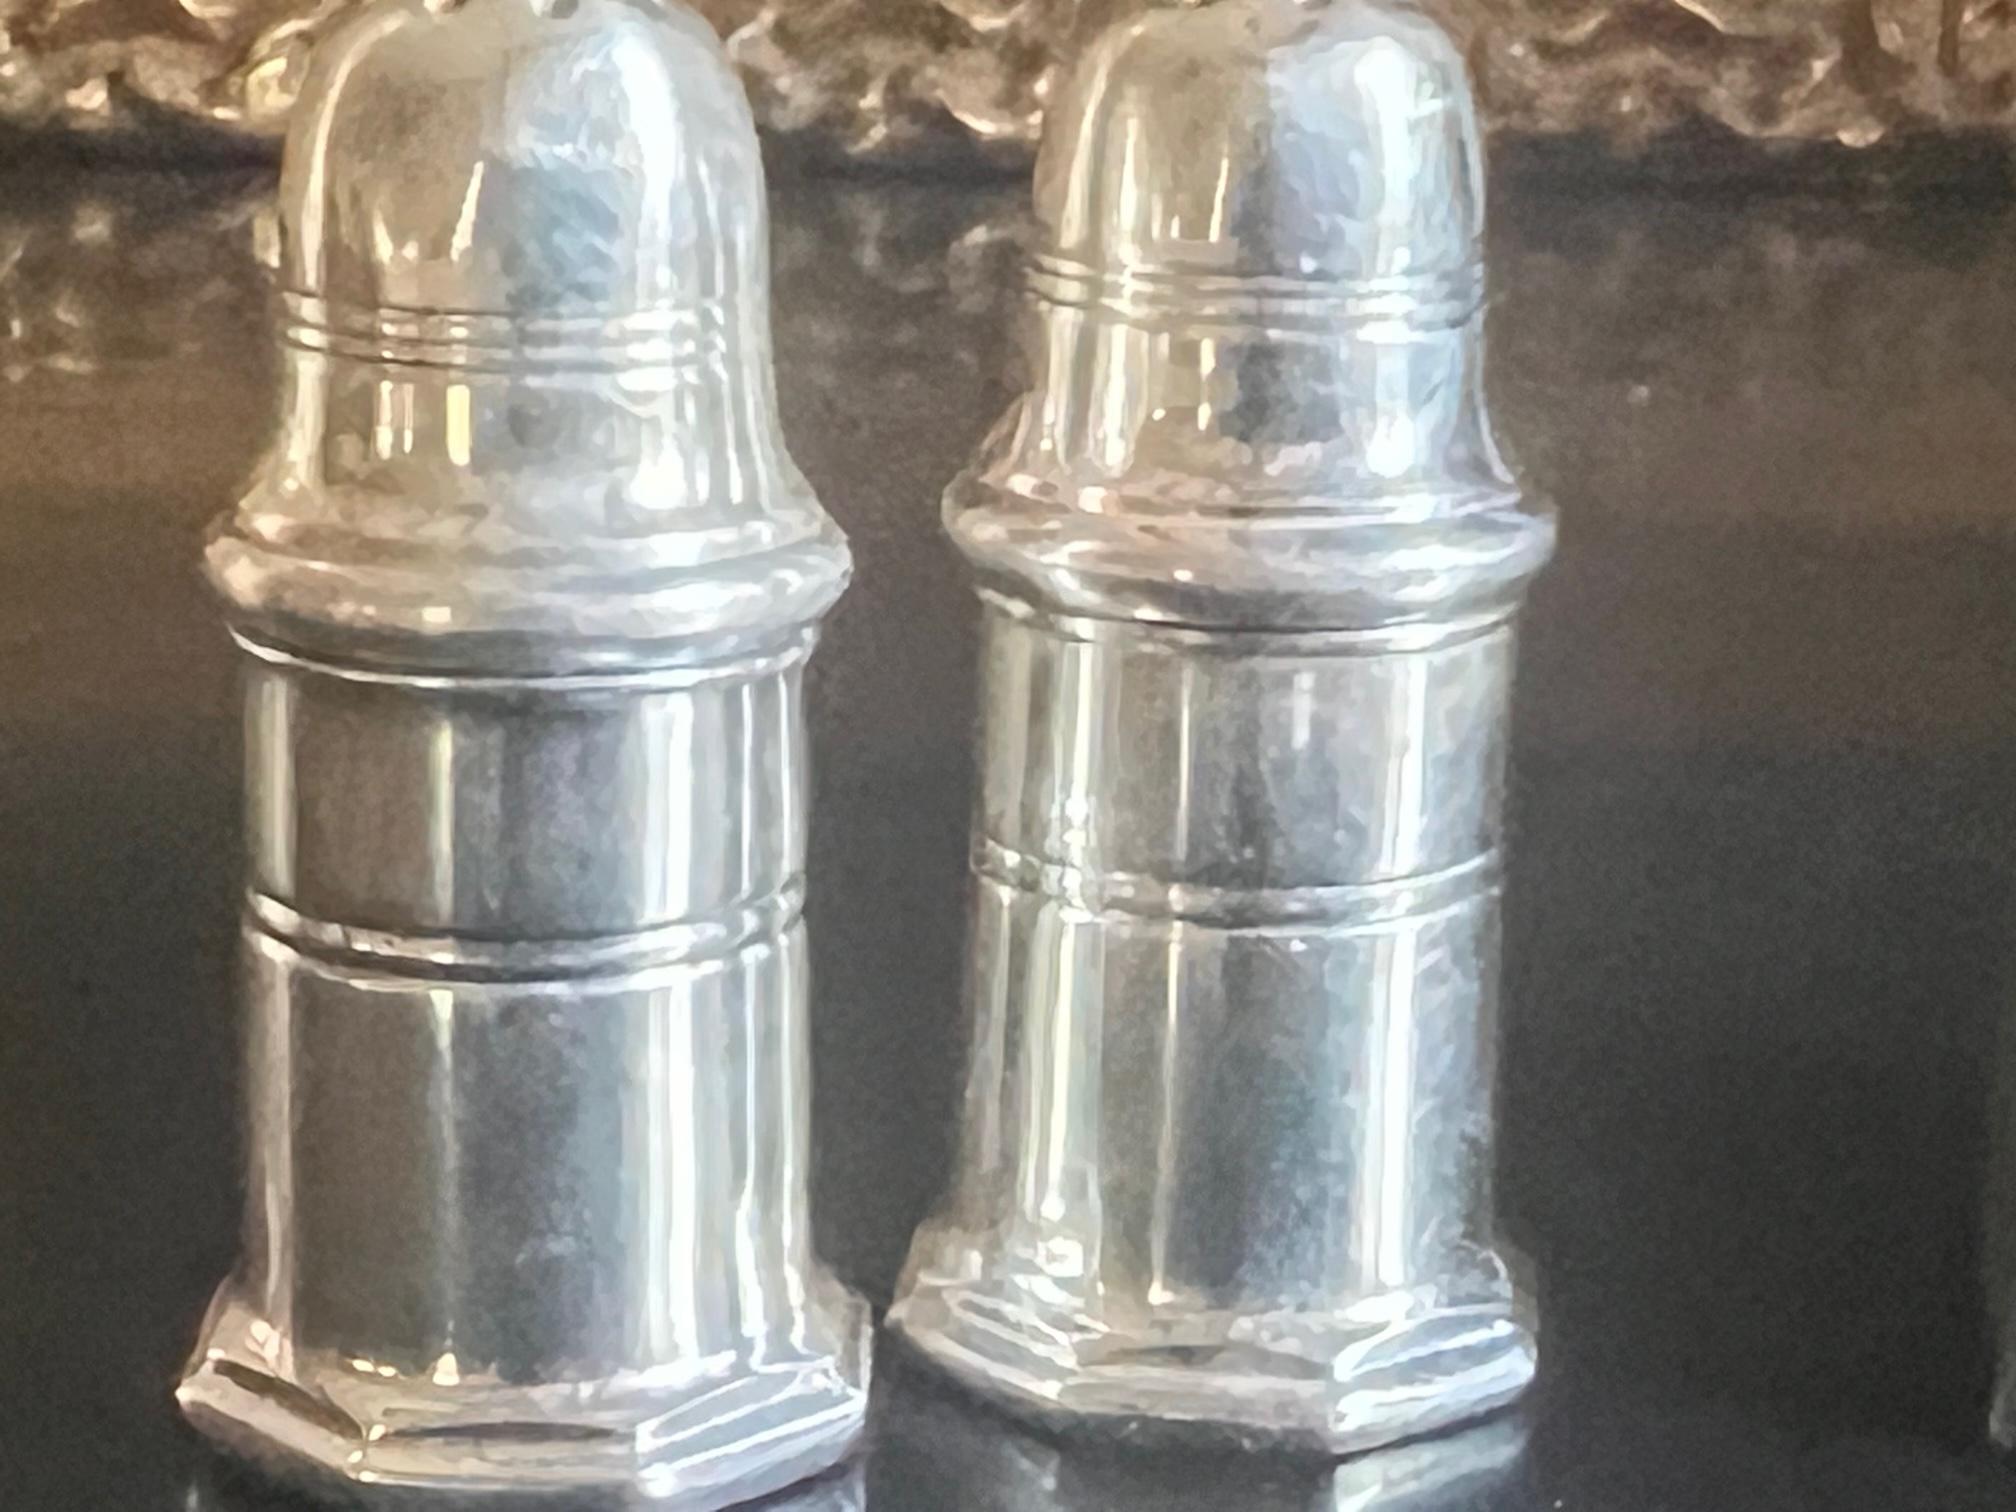 Edwardian French Silverplate Small Salt & Pepper Shakers by Christofle in Original Box